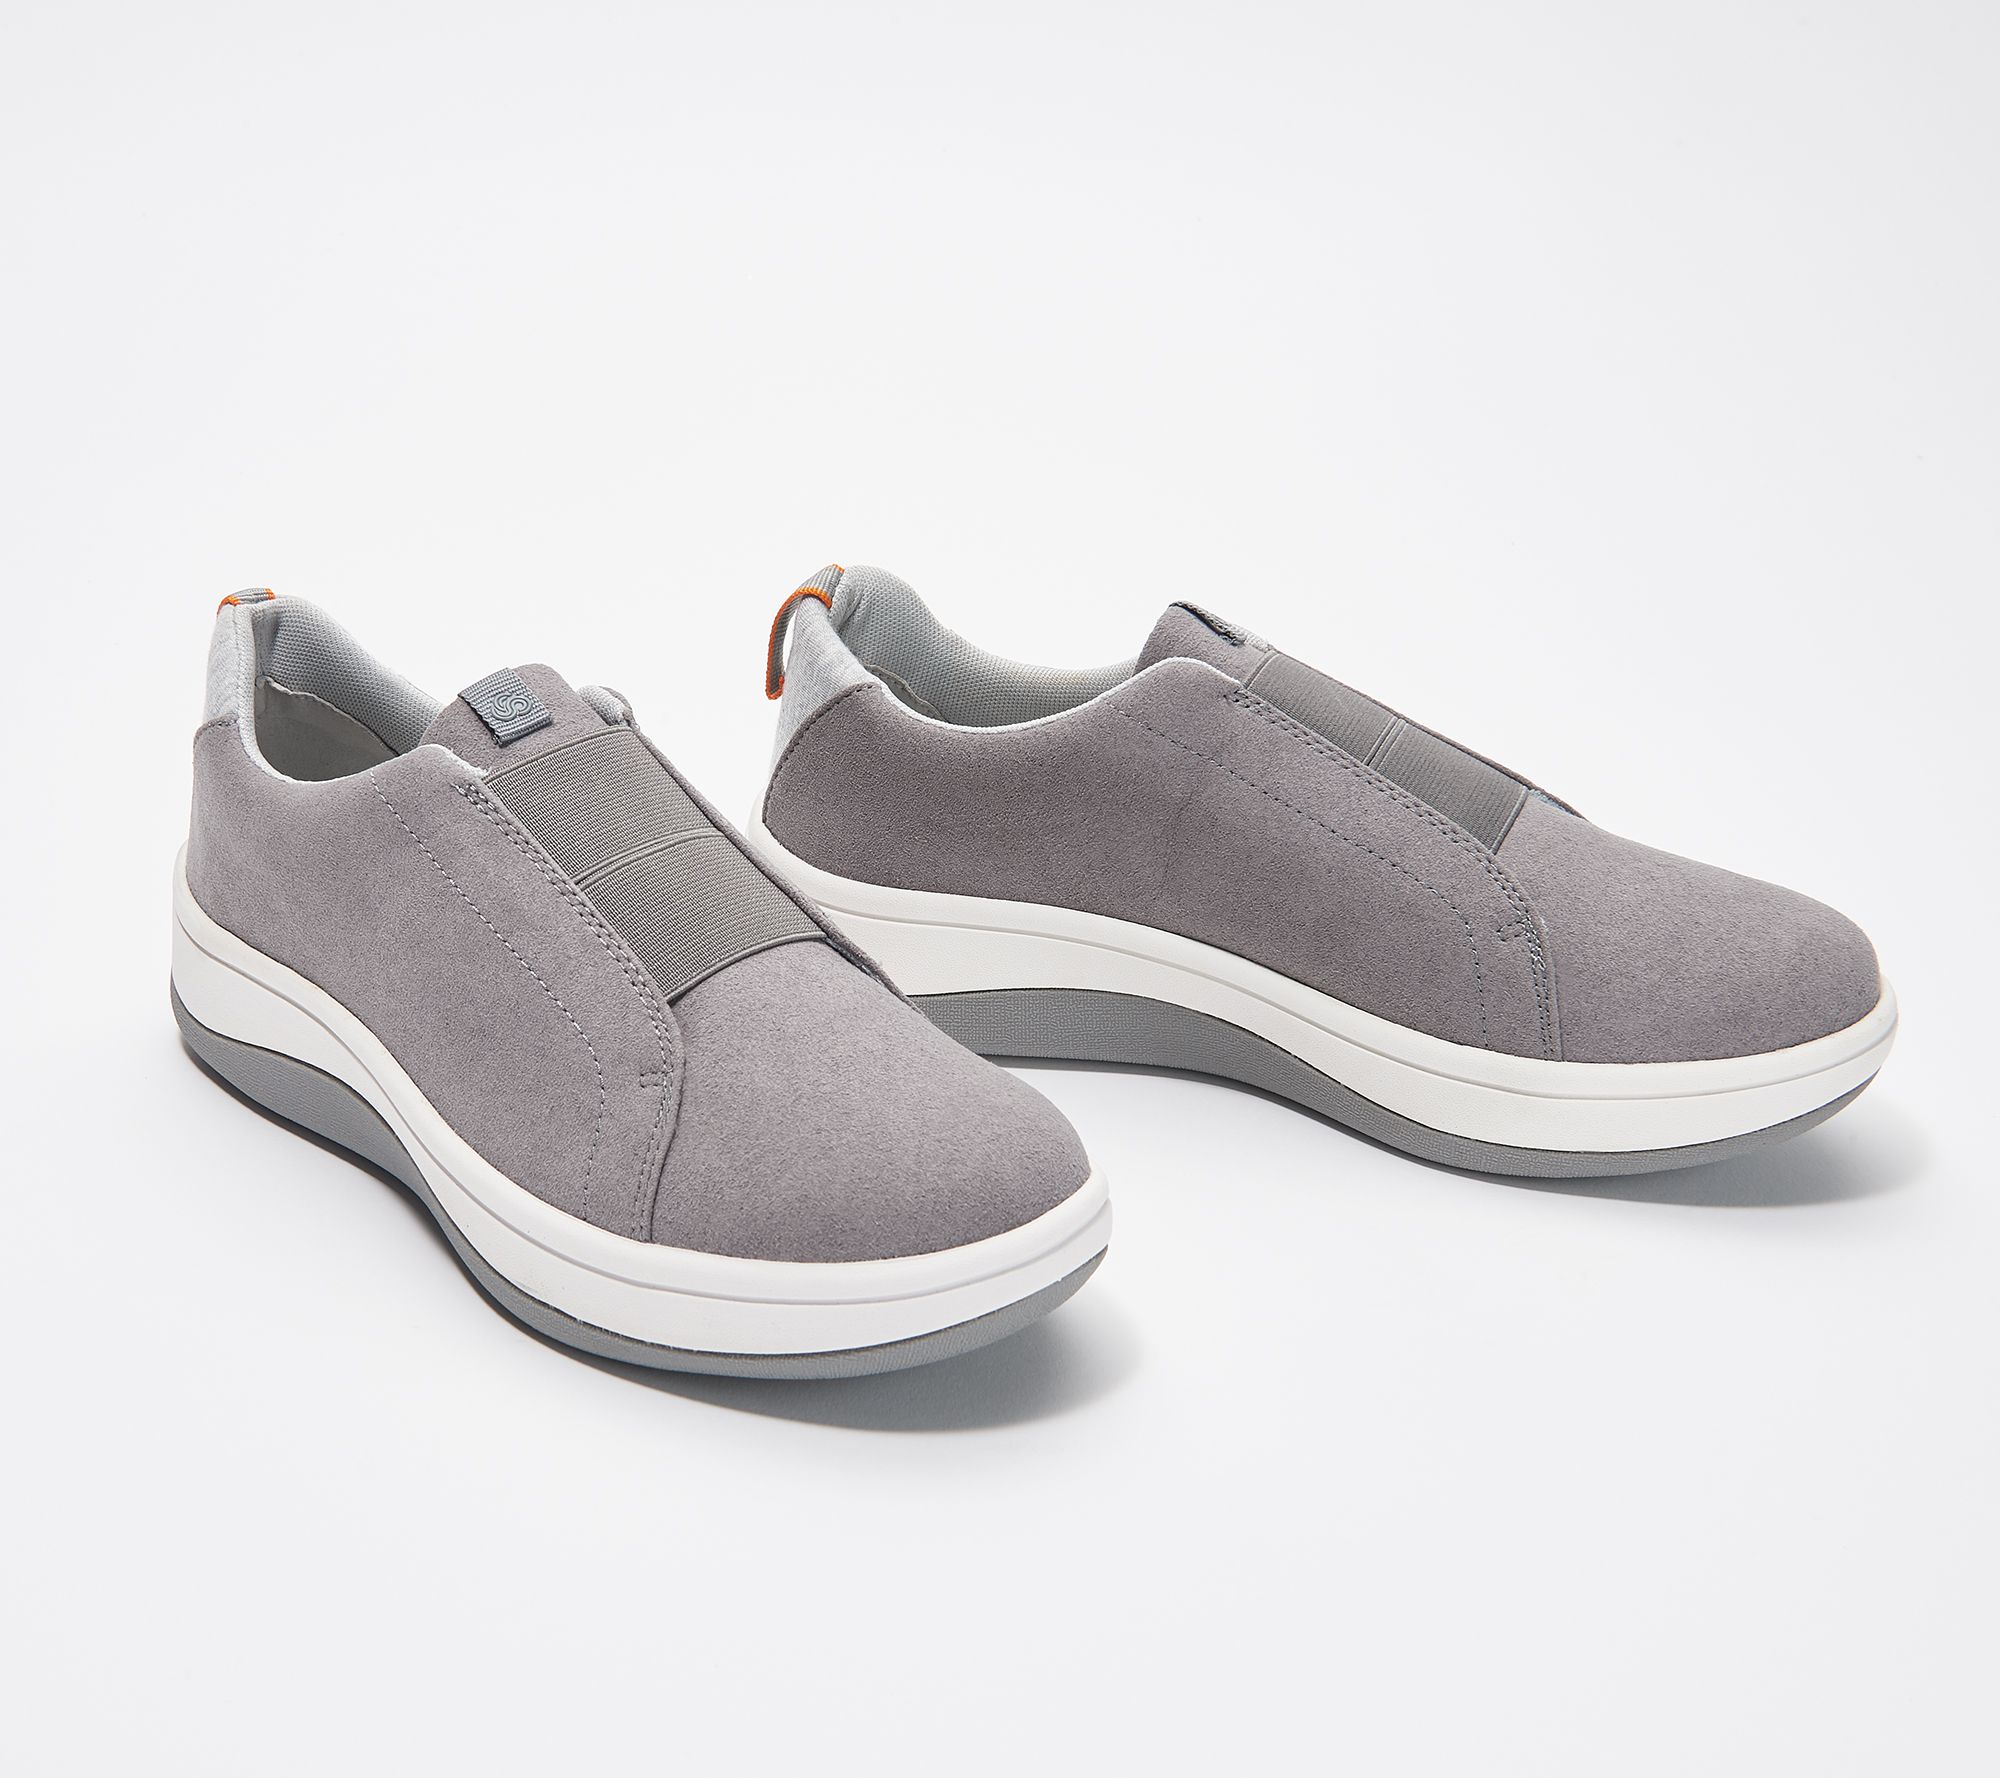 cloudstepper shoes by clarks